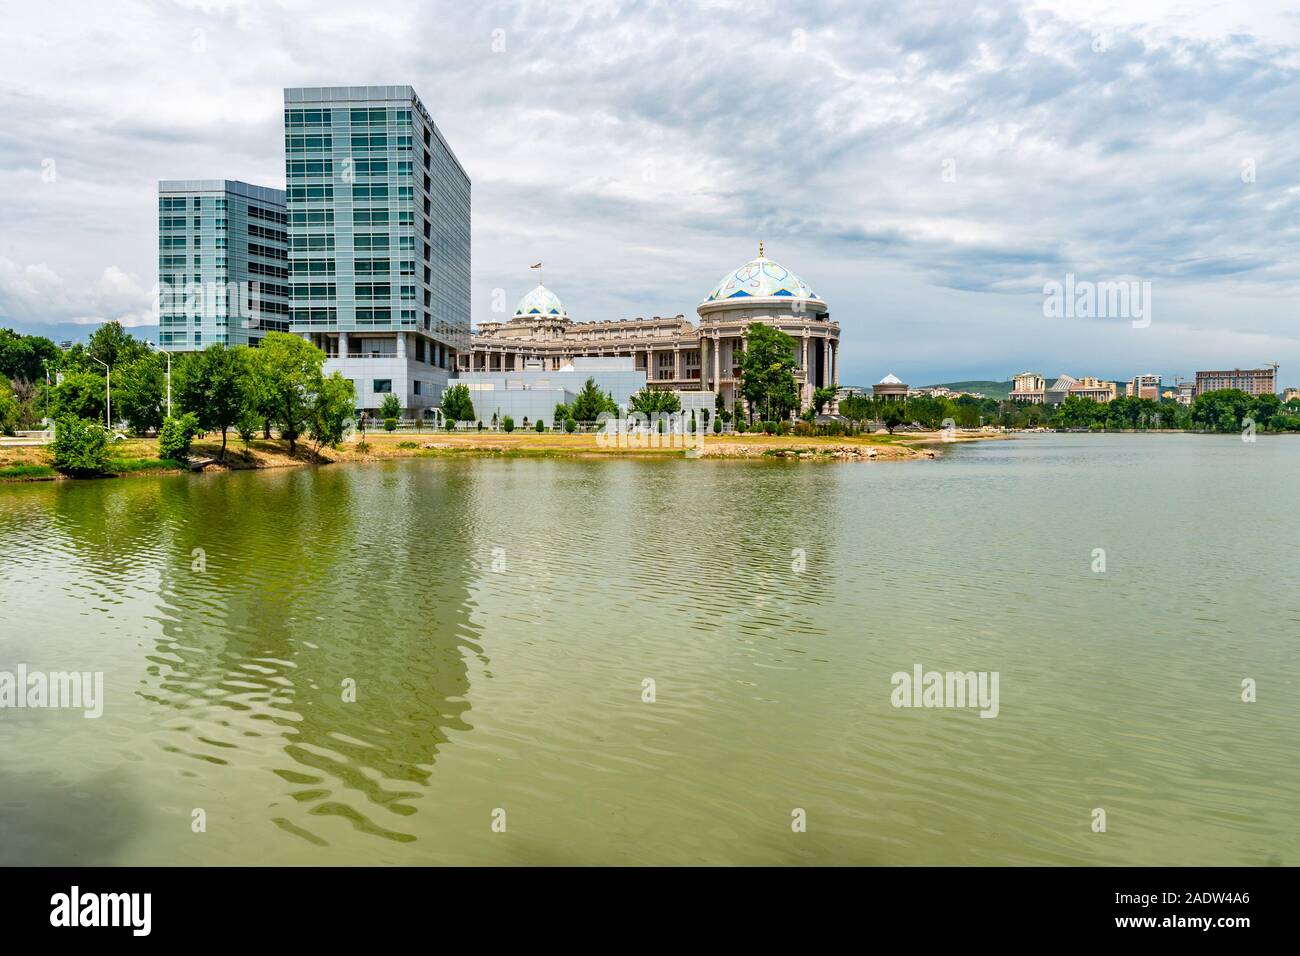 Dushanbe Hyatt Regency Hotel Picturesque View of Komsomolskoe Lake on a Cloudy Rainy Day Stock Photo